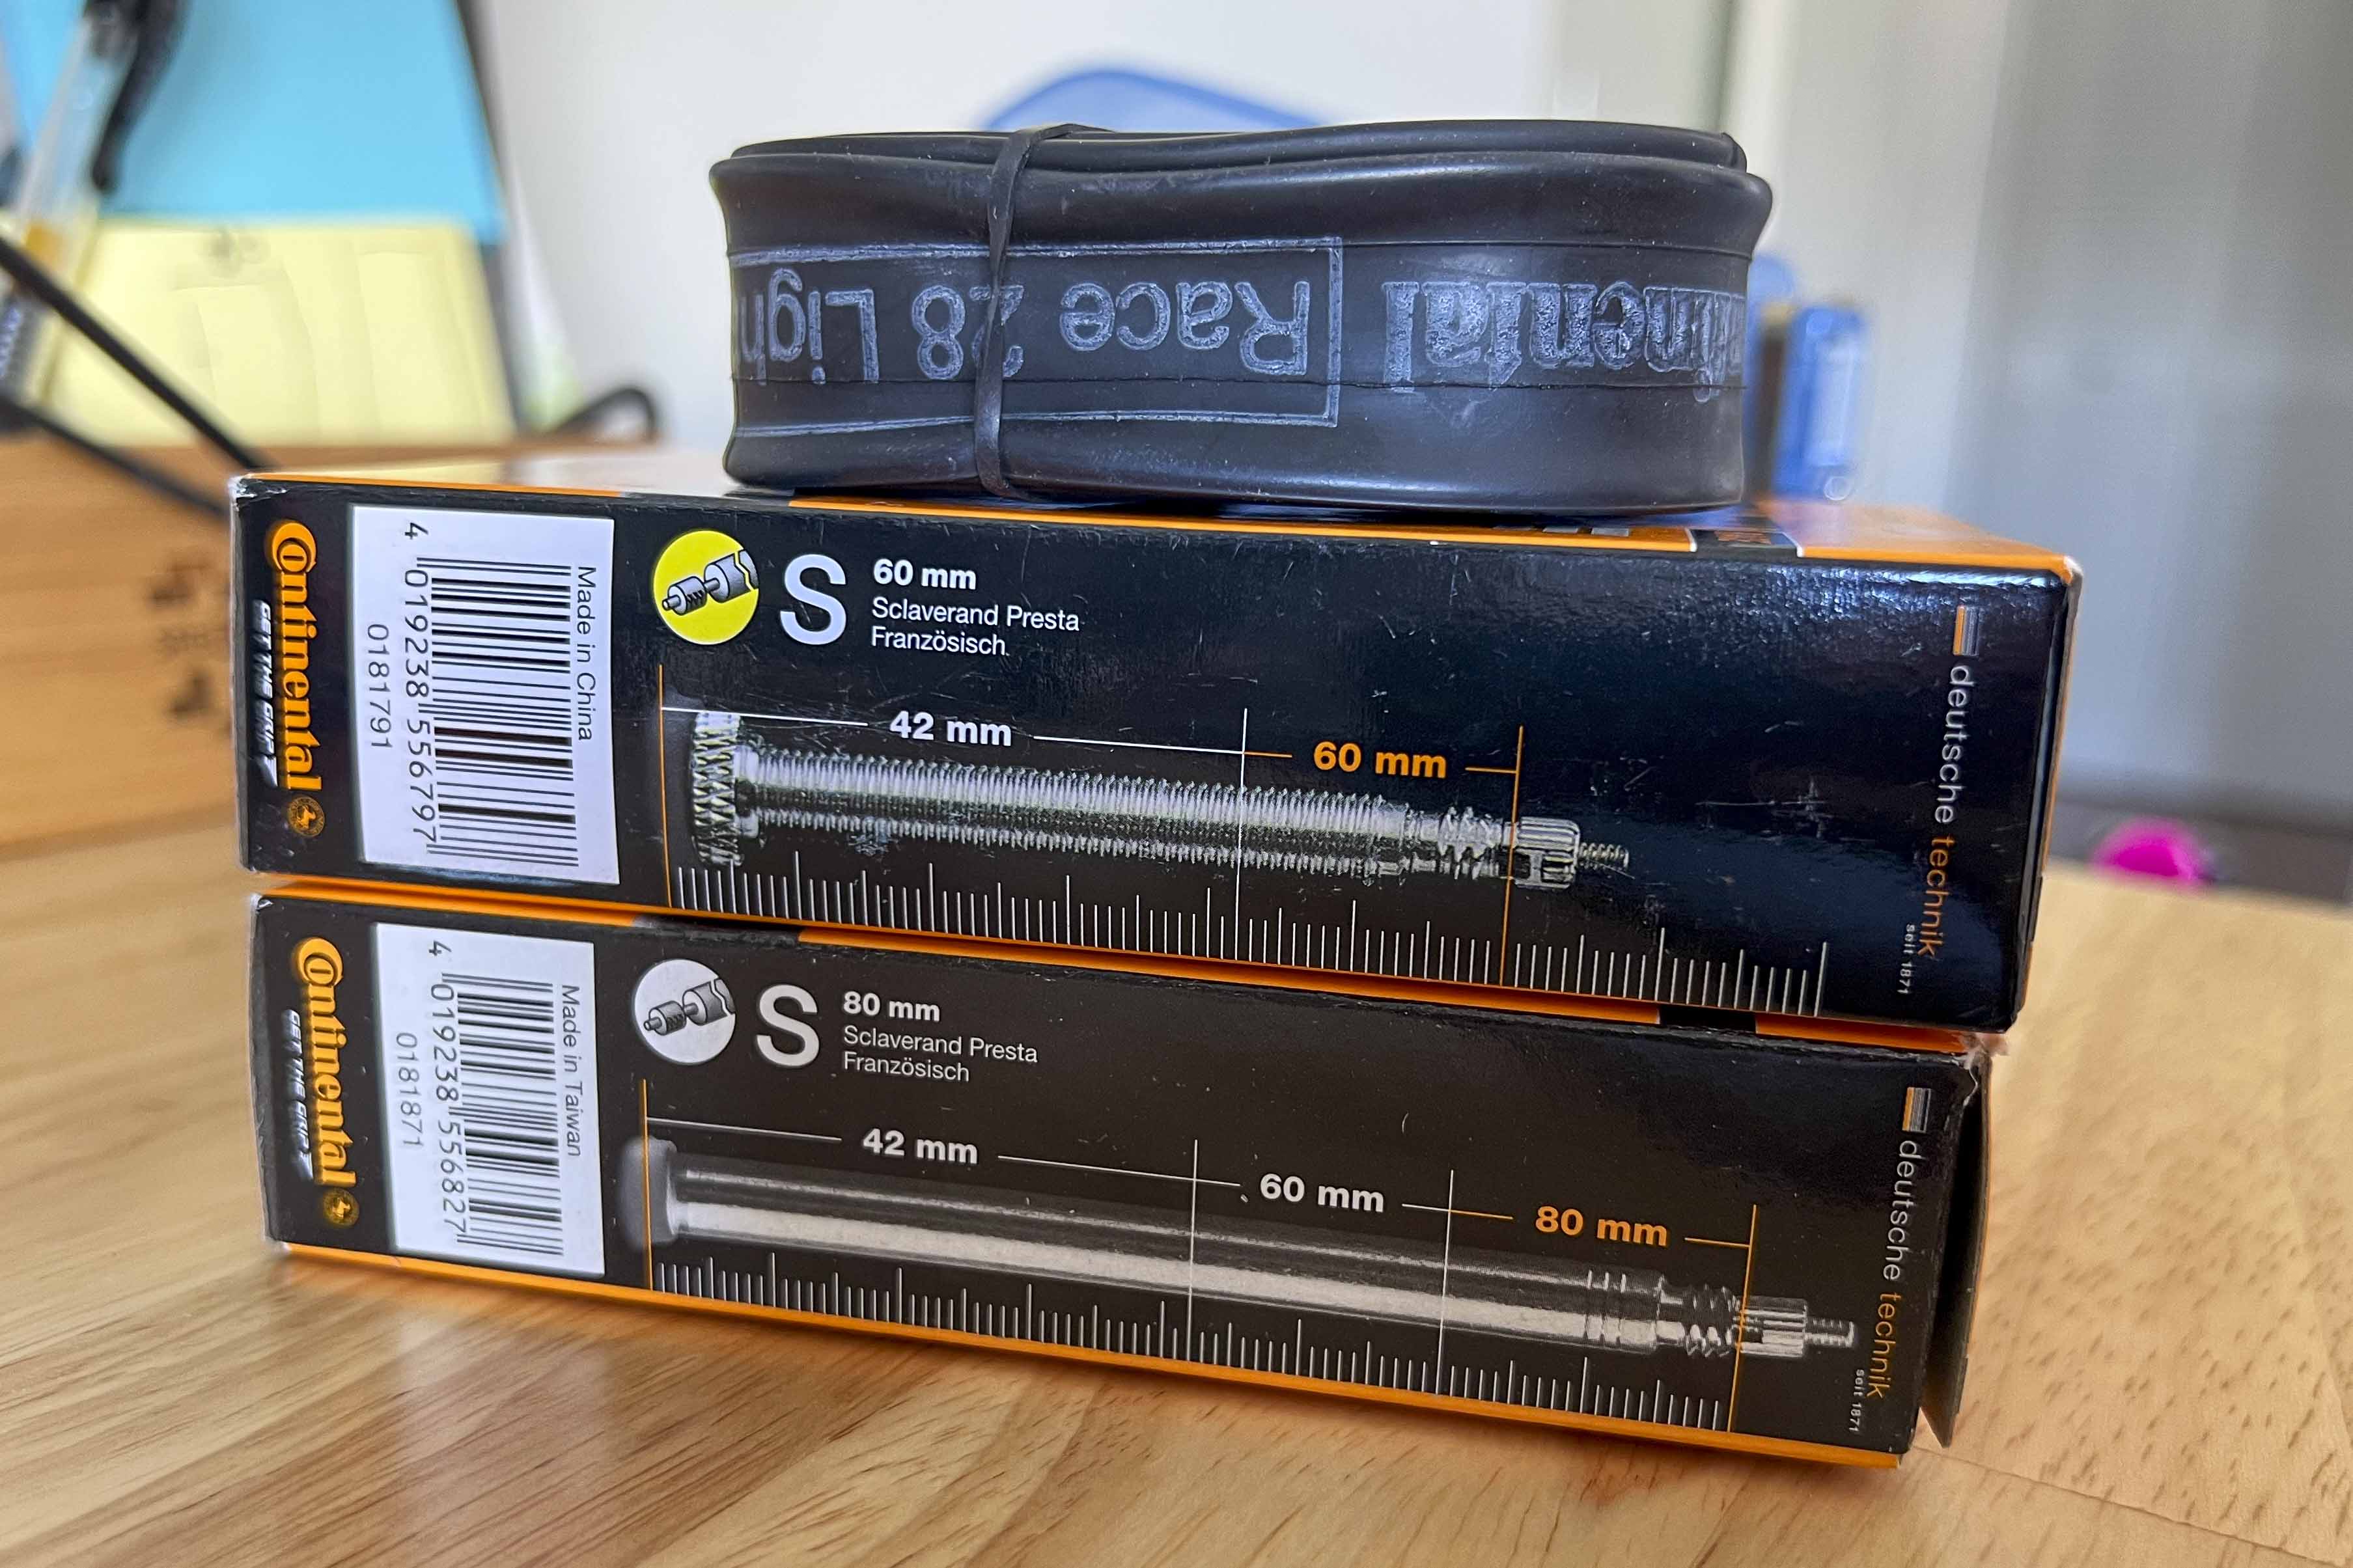 Stacked Continental branded bicycle tire tubes in boxes showing their valve stem lengths